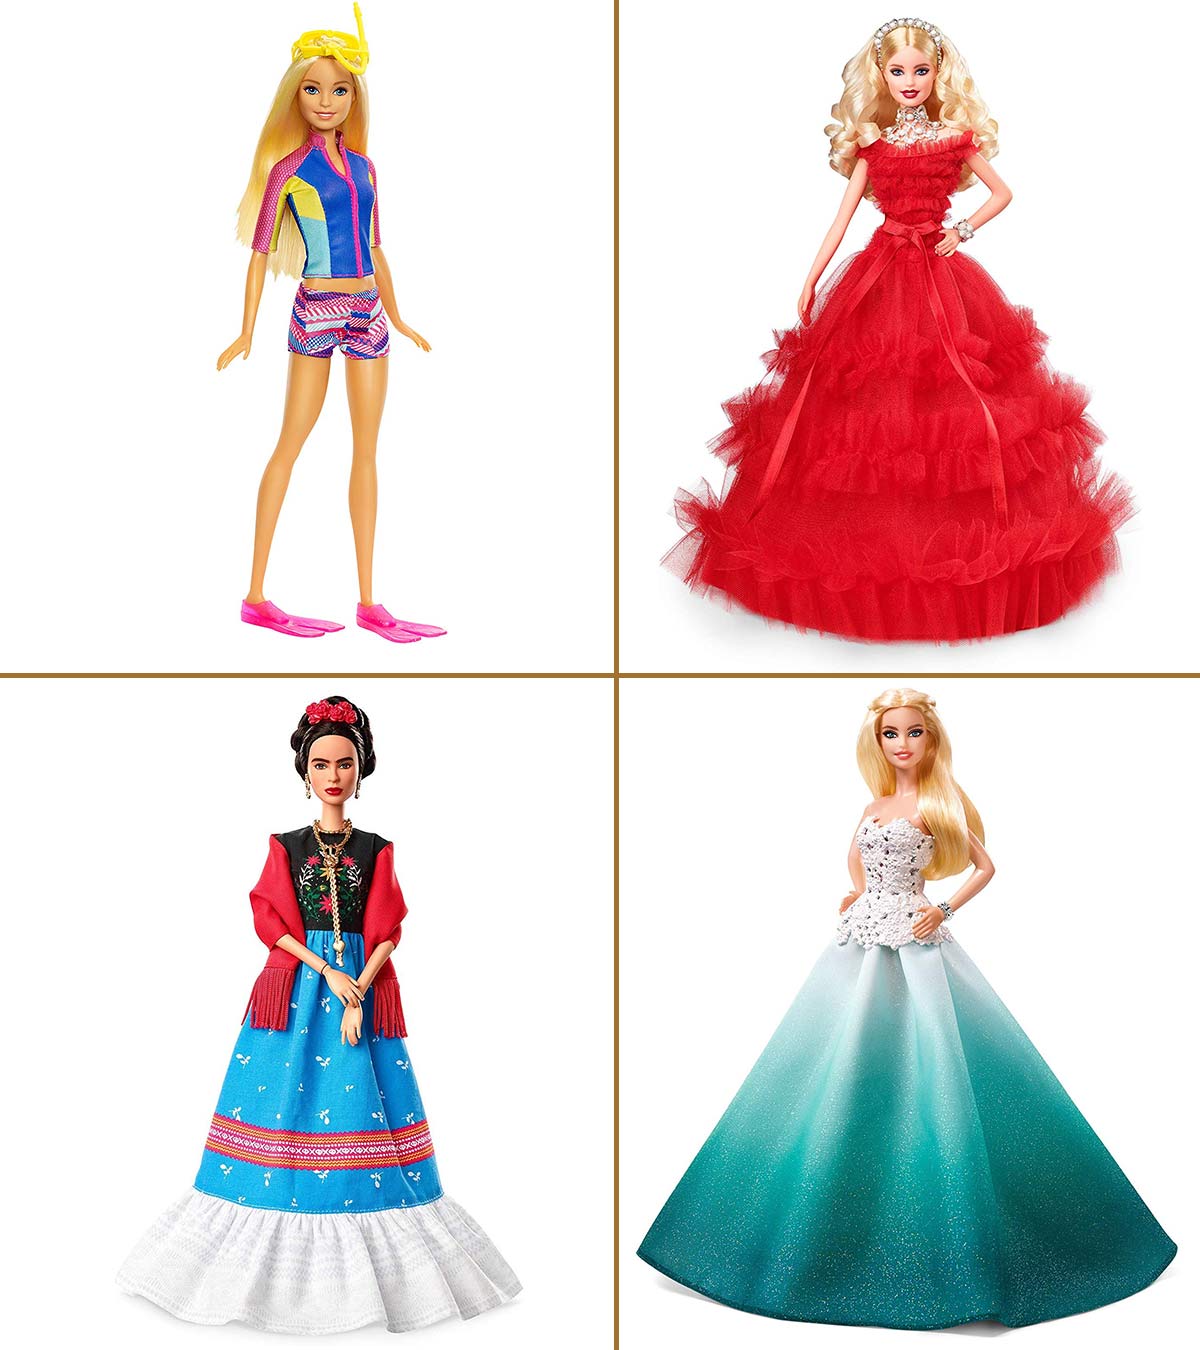 25 Best Barbie Toys to Buy in 2023 - Barbie Dolls for Kids